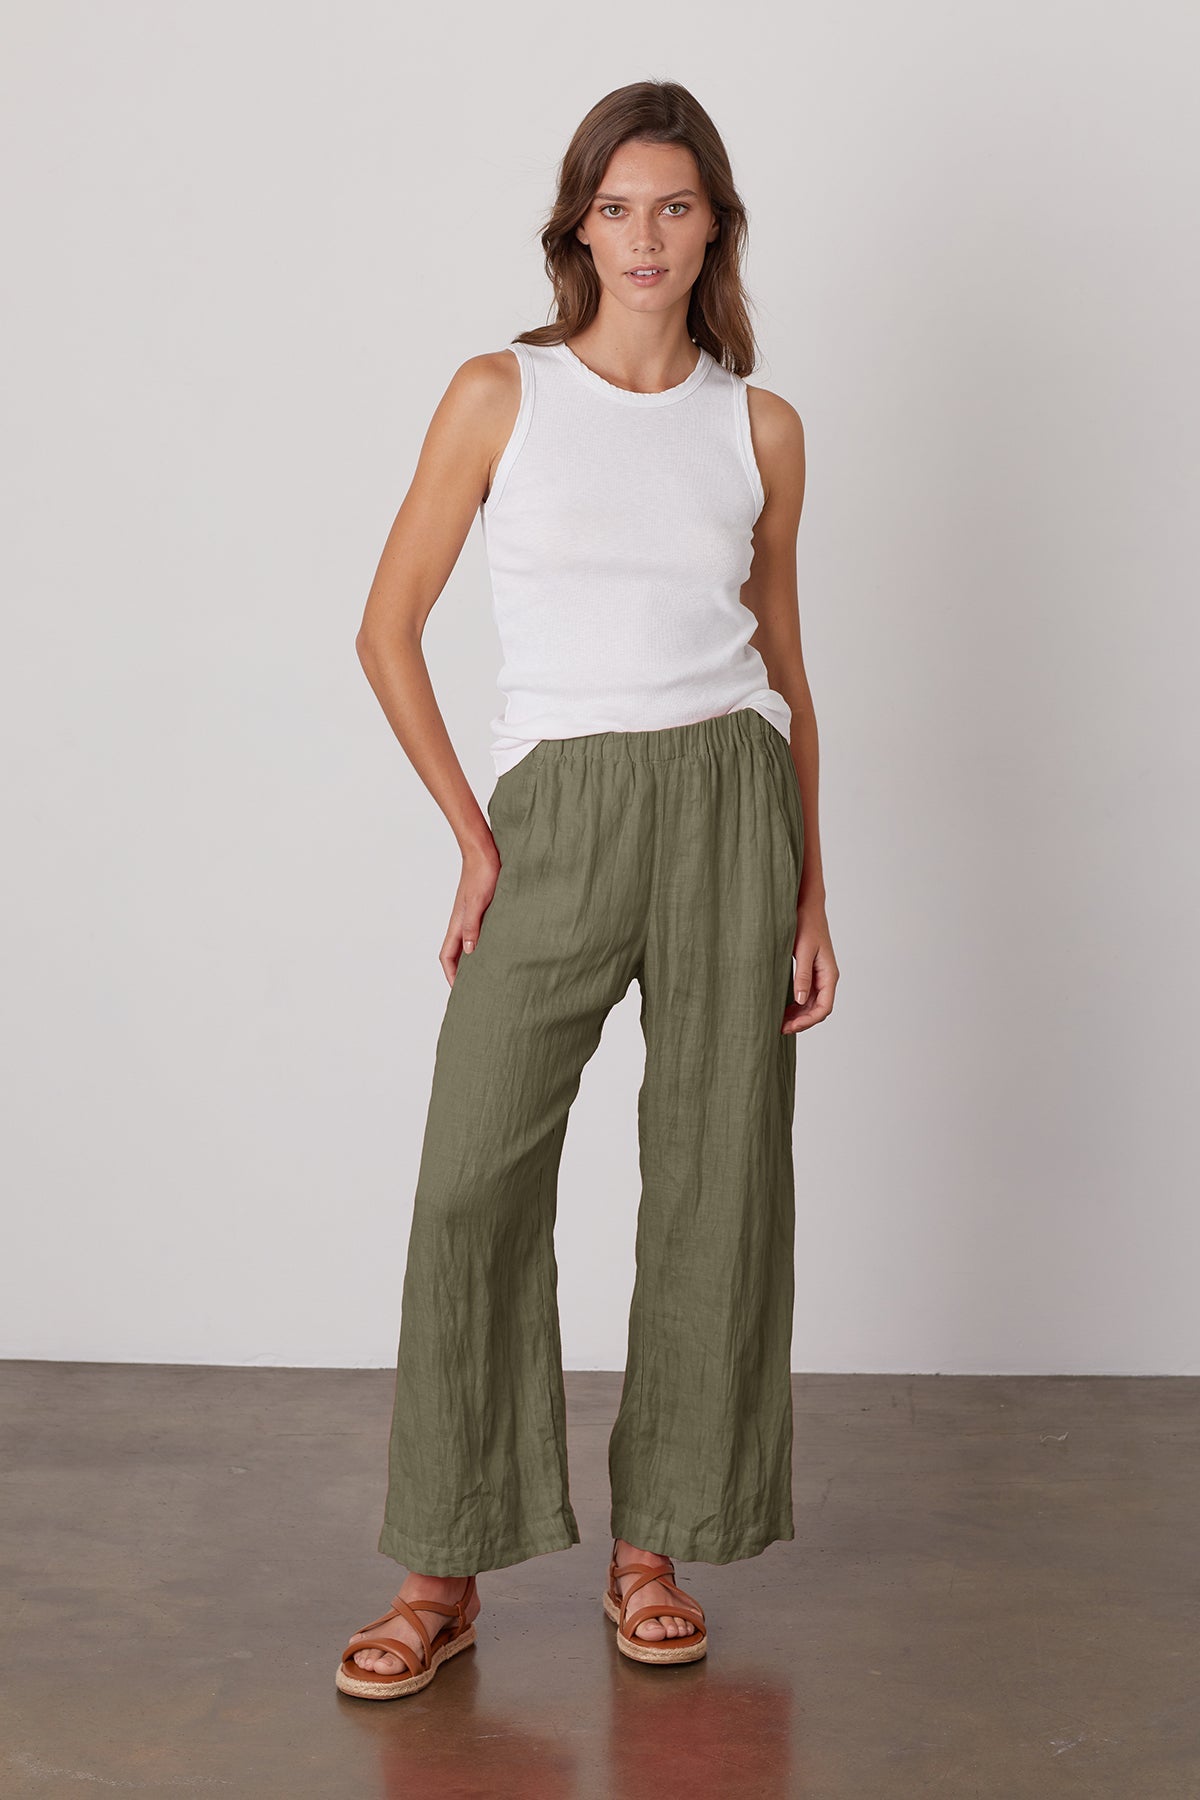 Lola linen pant in olive green with Maxie tank in white.-25329015587009